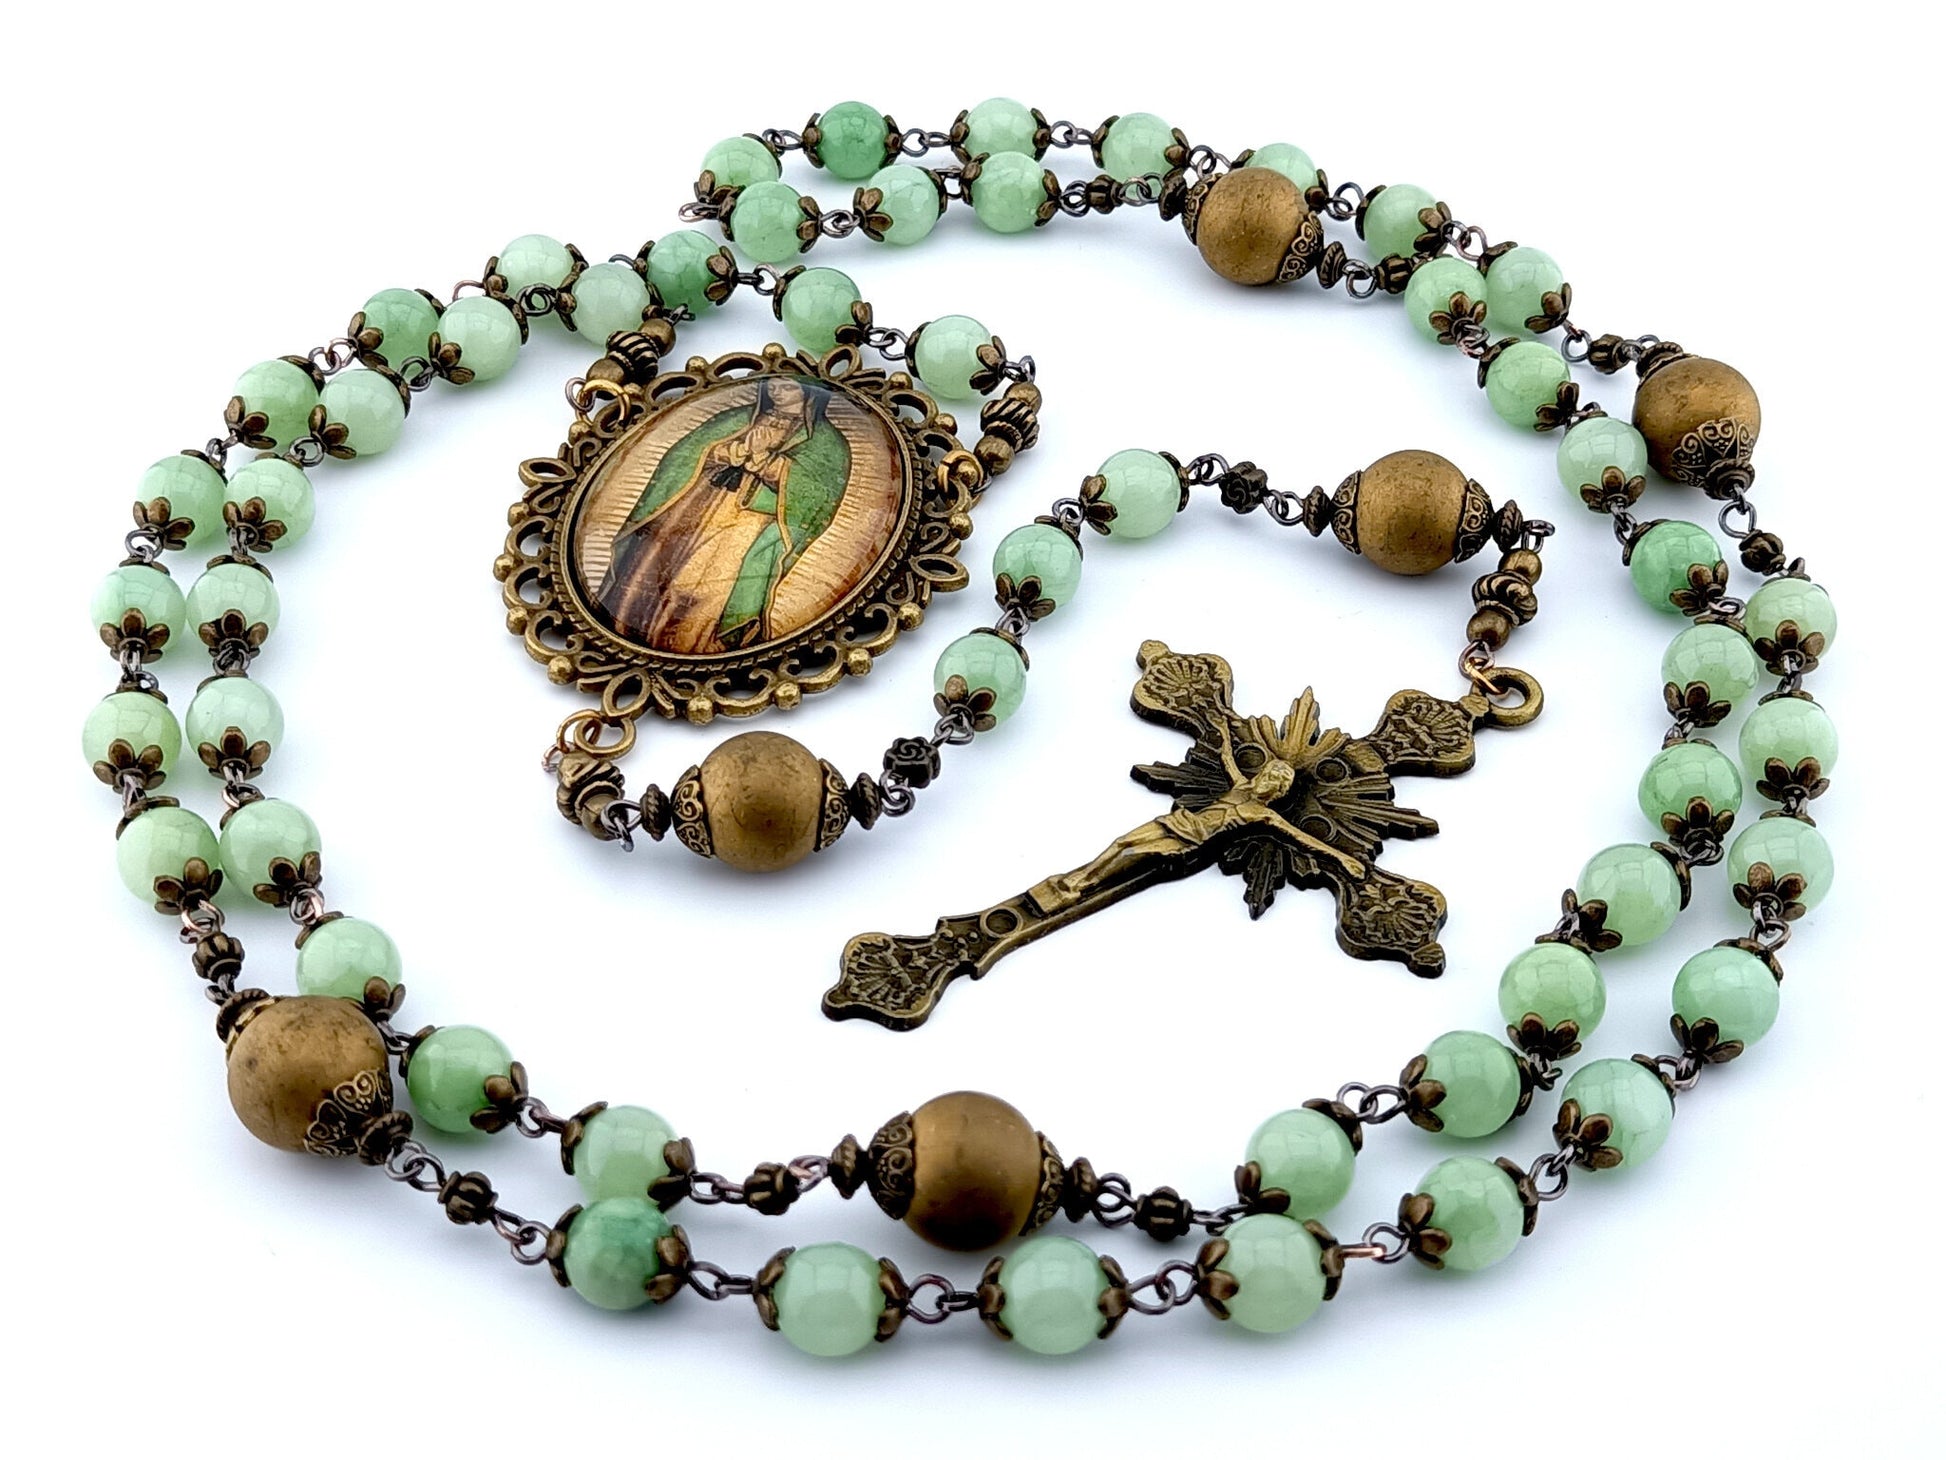 Our Lady of Guadalupe unique rosary beads with jade and gold glass beads, bronze crucifix and centre picture medal and bead caps.